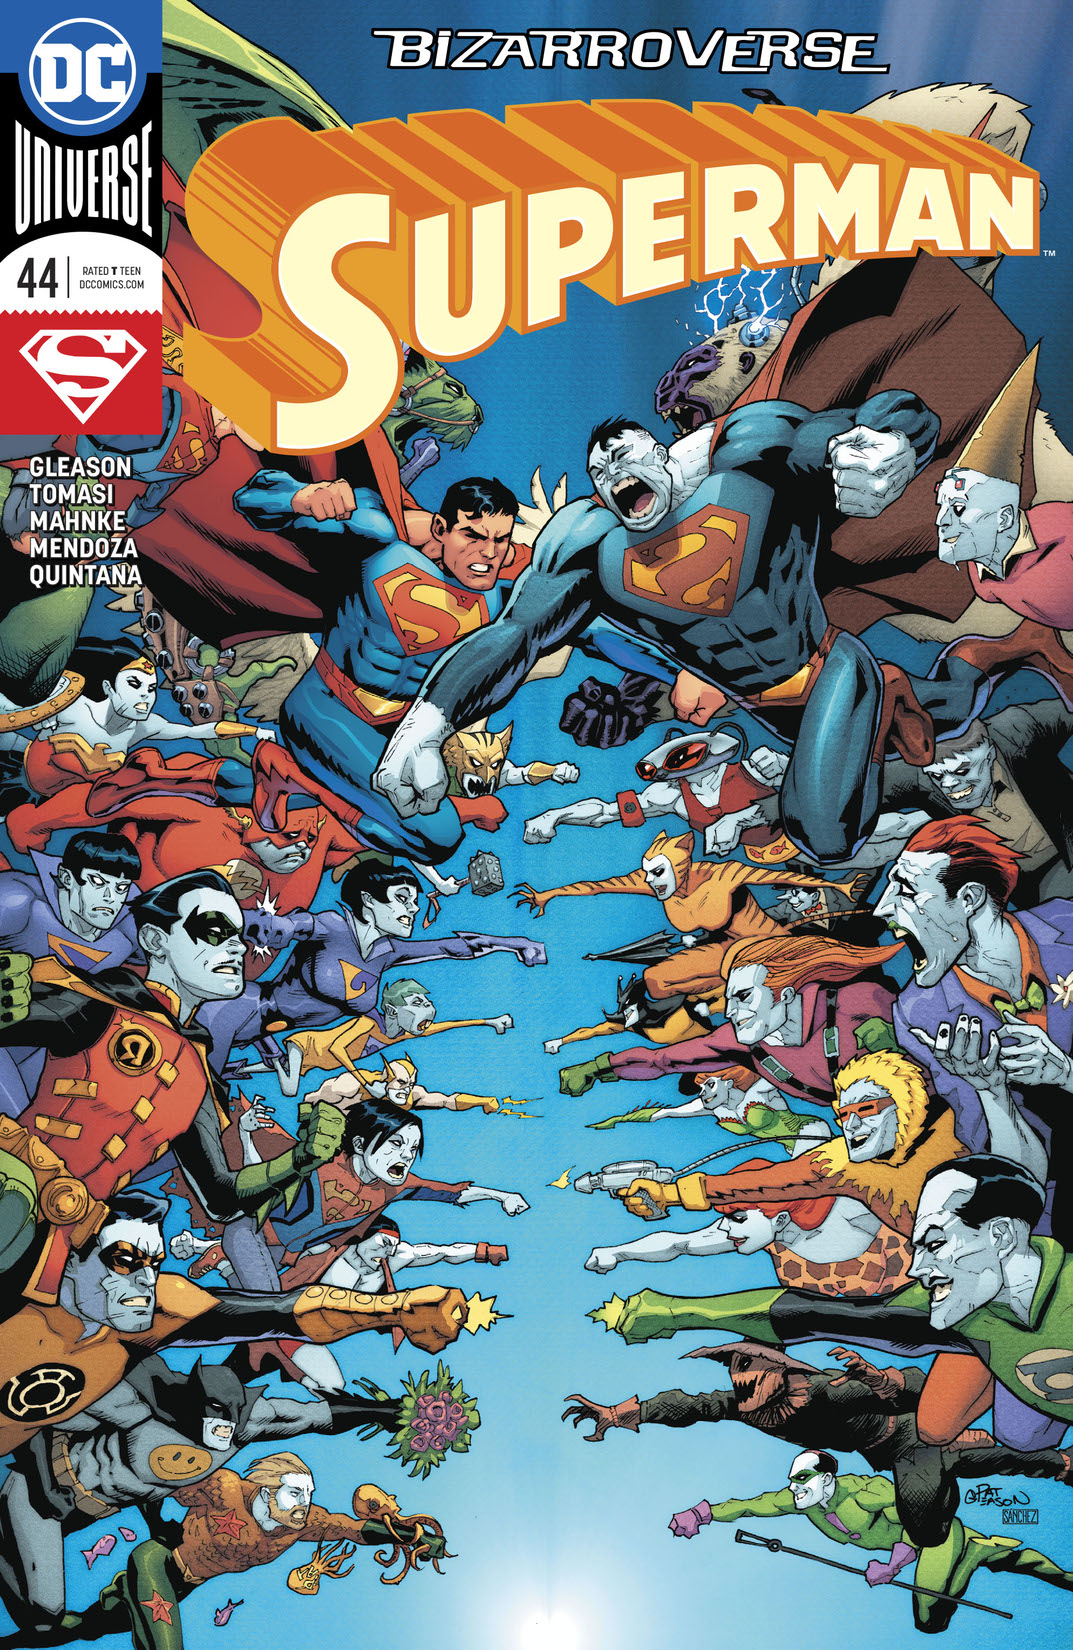 Superman (2016-) #44 preview images